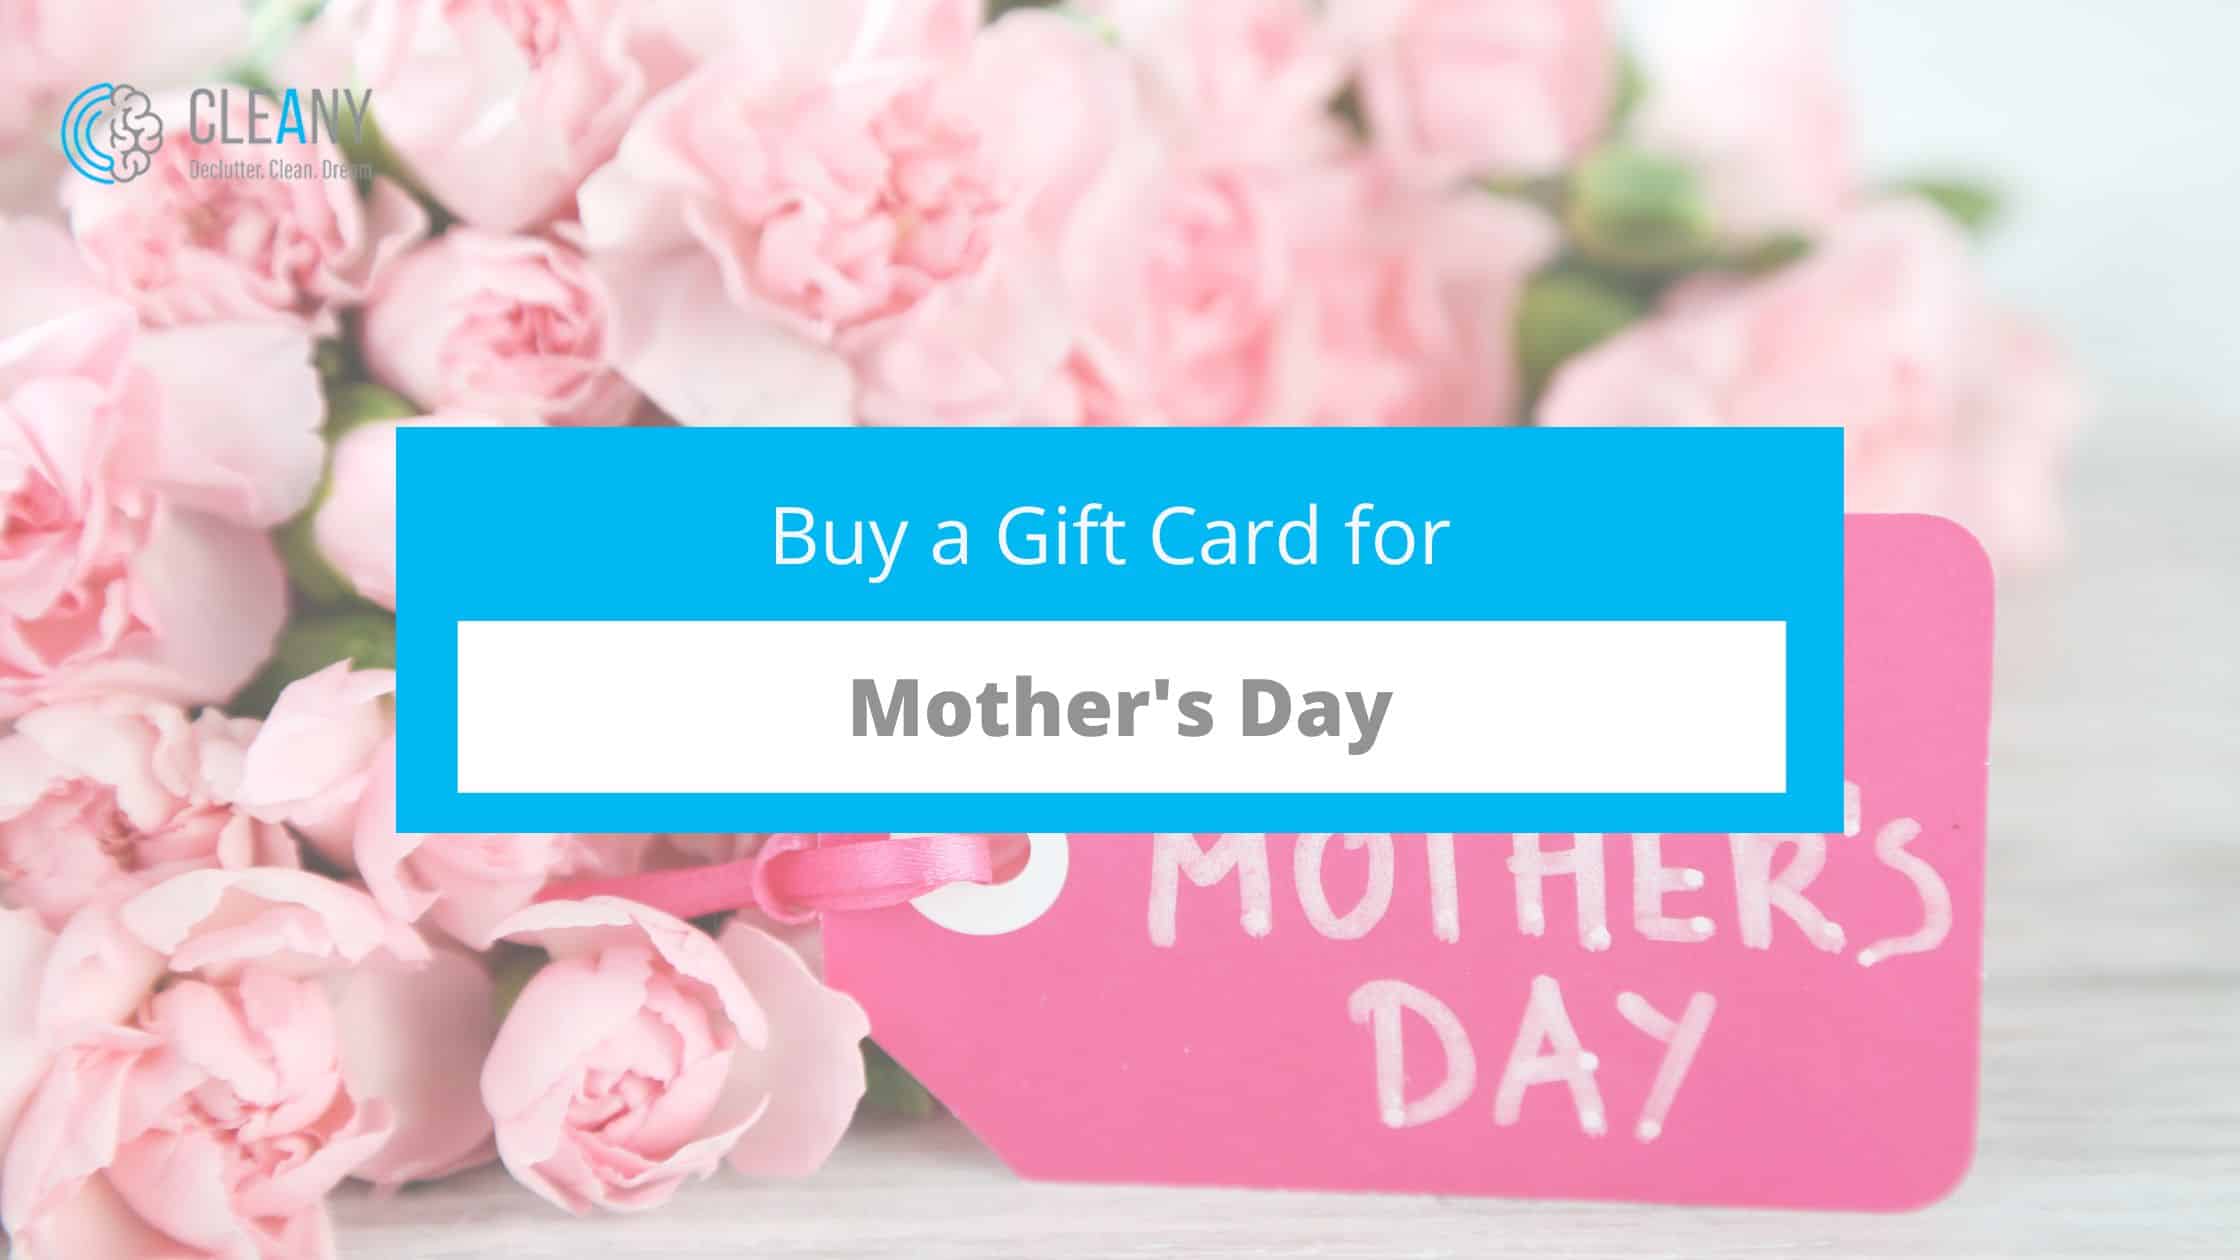 Buy a Gift Card for Mother's Day